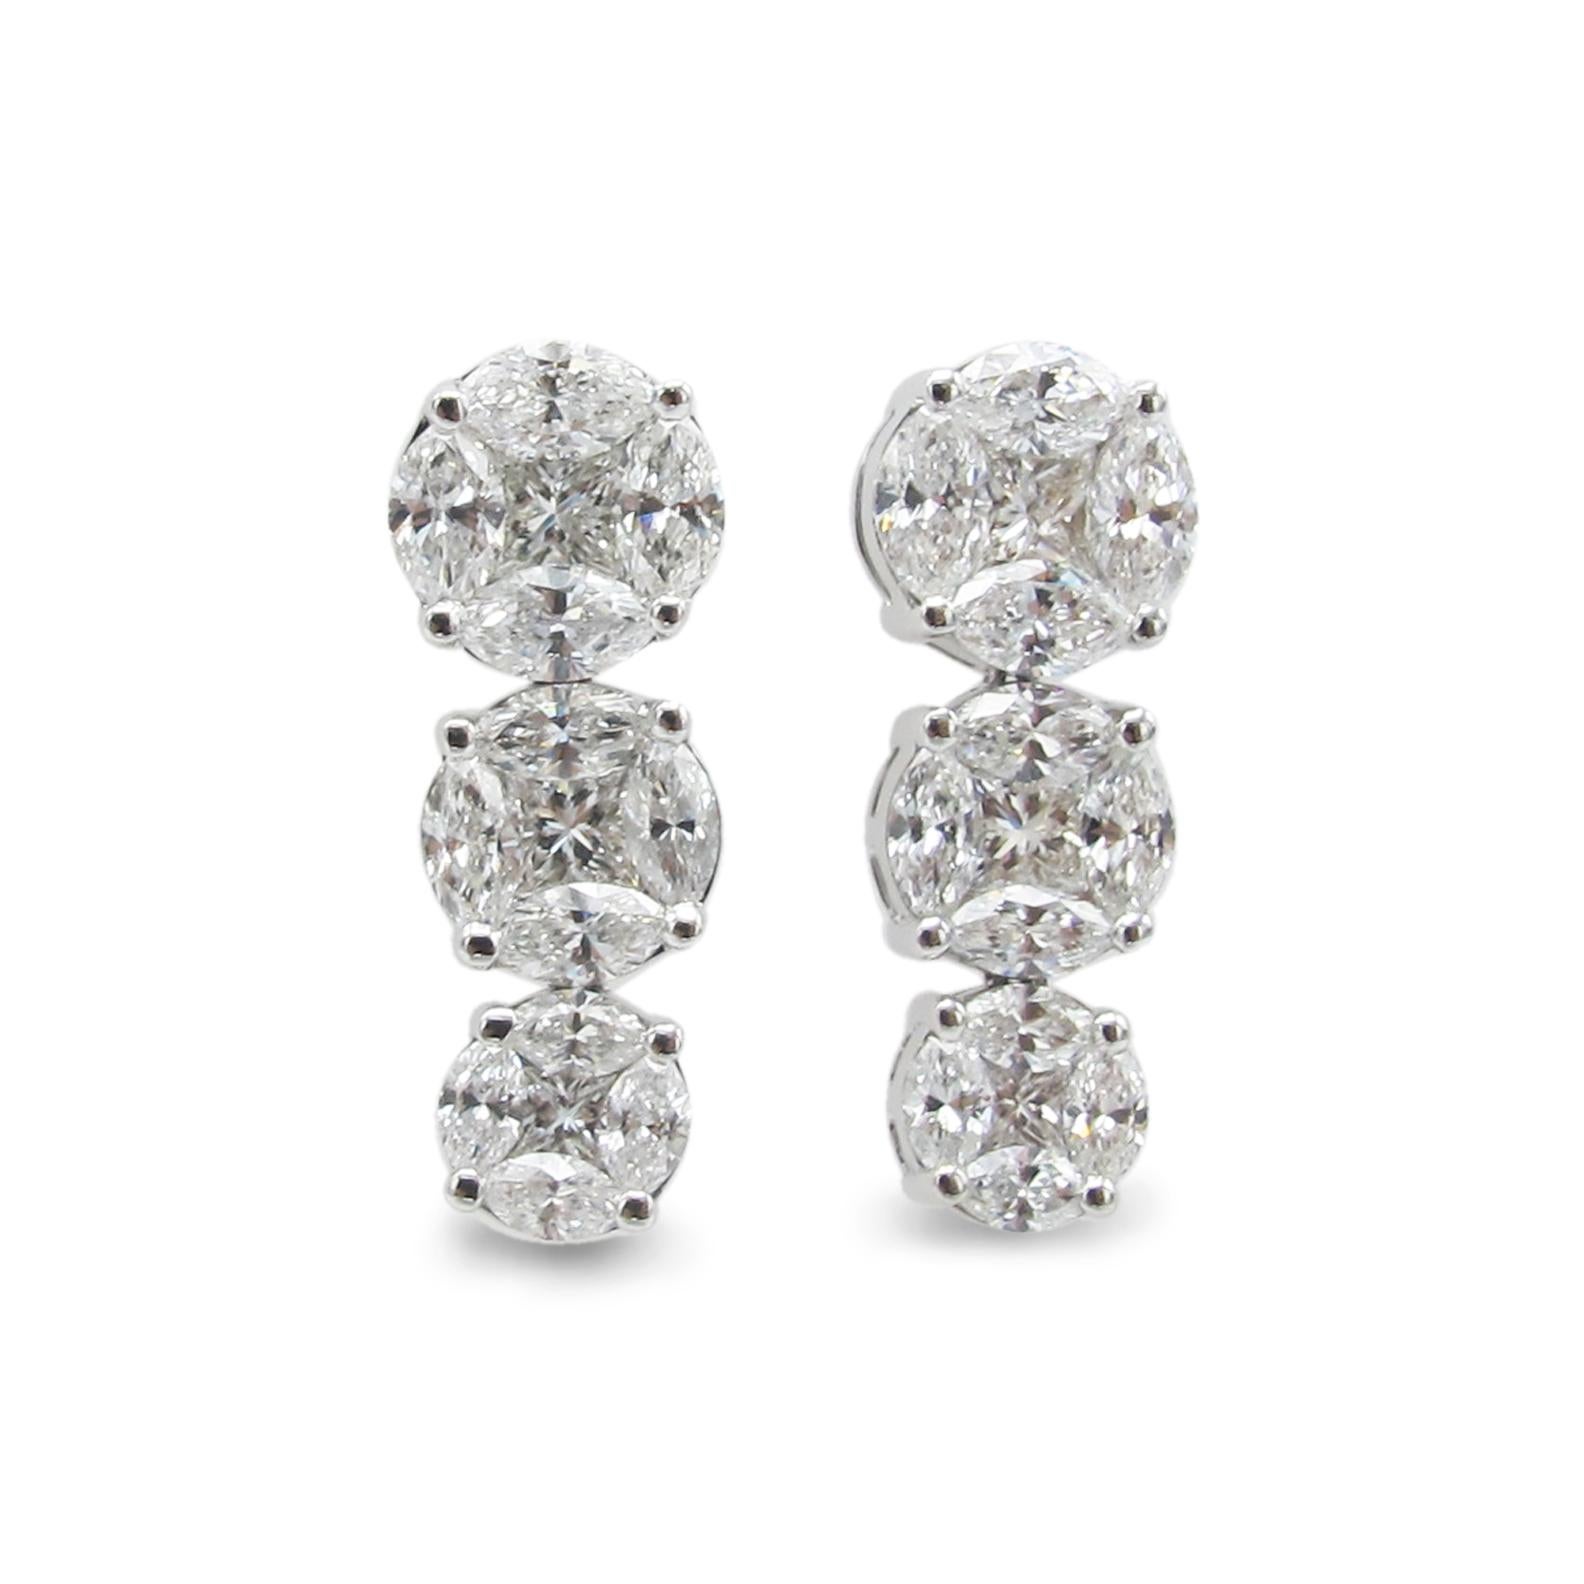 From the vault at Emilio Jewelry New York,
A hand made diamond earring drop, creating a mastering illusion of large singe diamonds in the breathtaking earring! 
30 Pieces D-G Color VS-SI 2.64 Carats 
Hand made in the Emilio Jewelry Atelier, whom